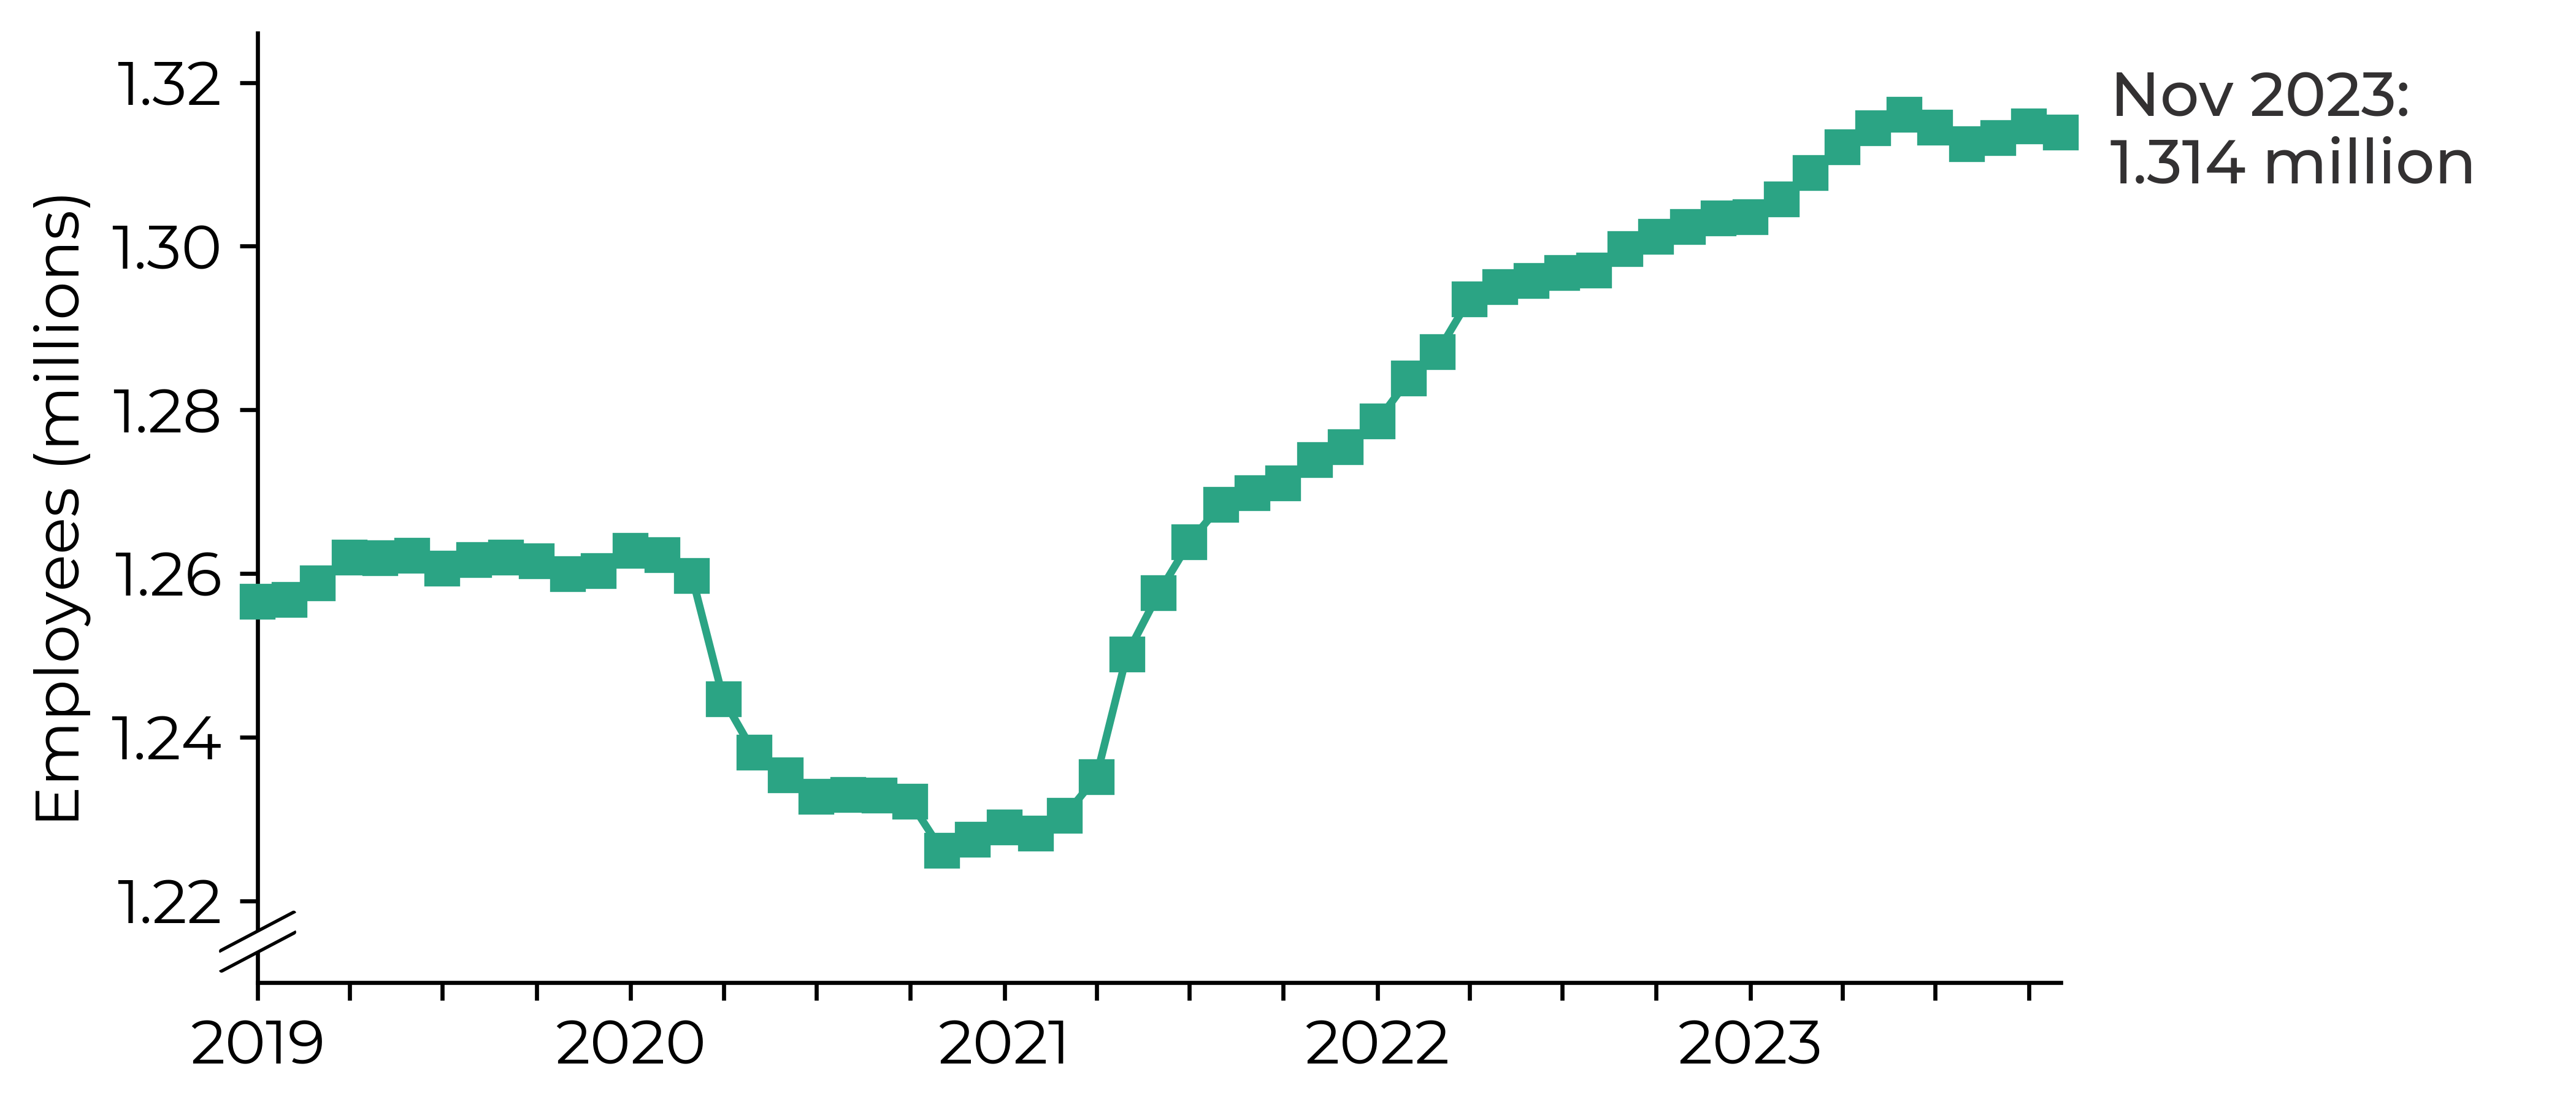 Alt-text: Graph showing a large dip in payrolled employees during the period March 2020 to March 2021 to under 1.23 million. This was followed by an increase to 1.316 million by June 2023 and a decrease to 1.314 million in November 2023.